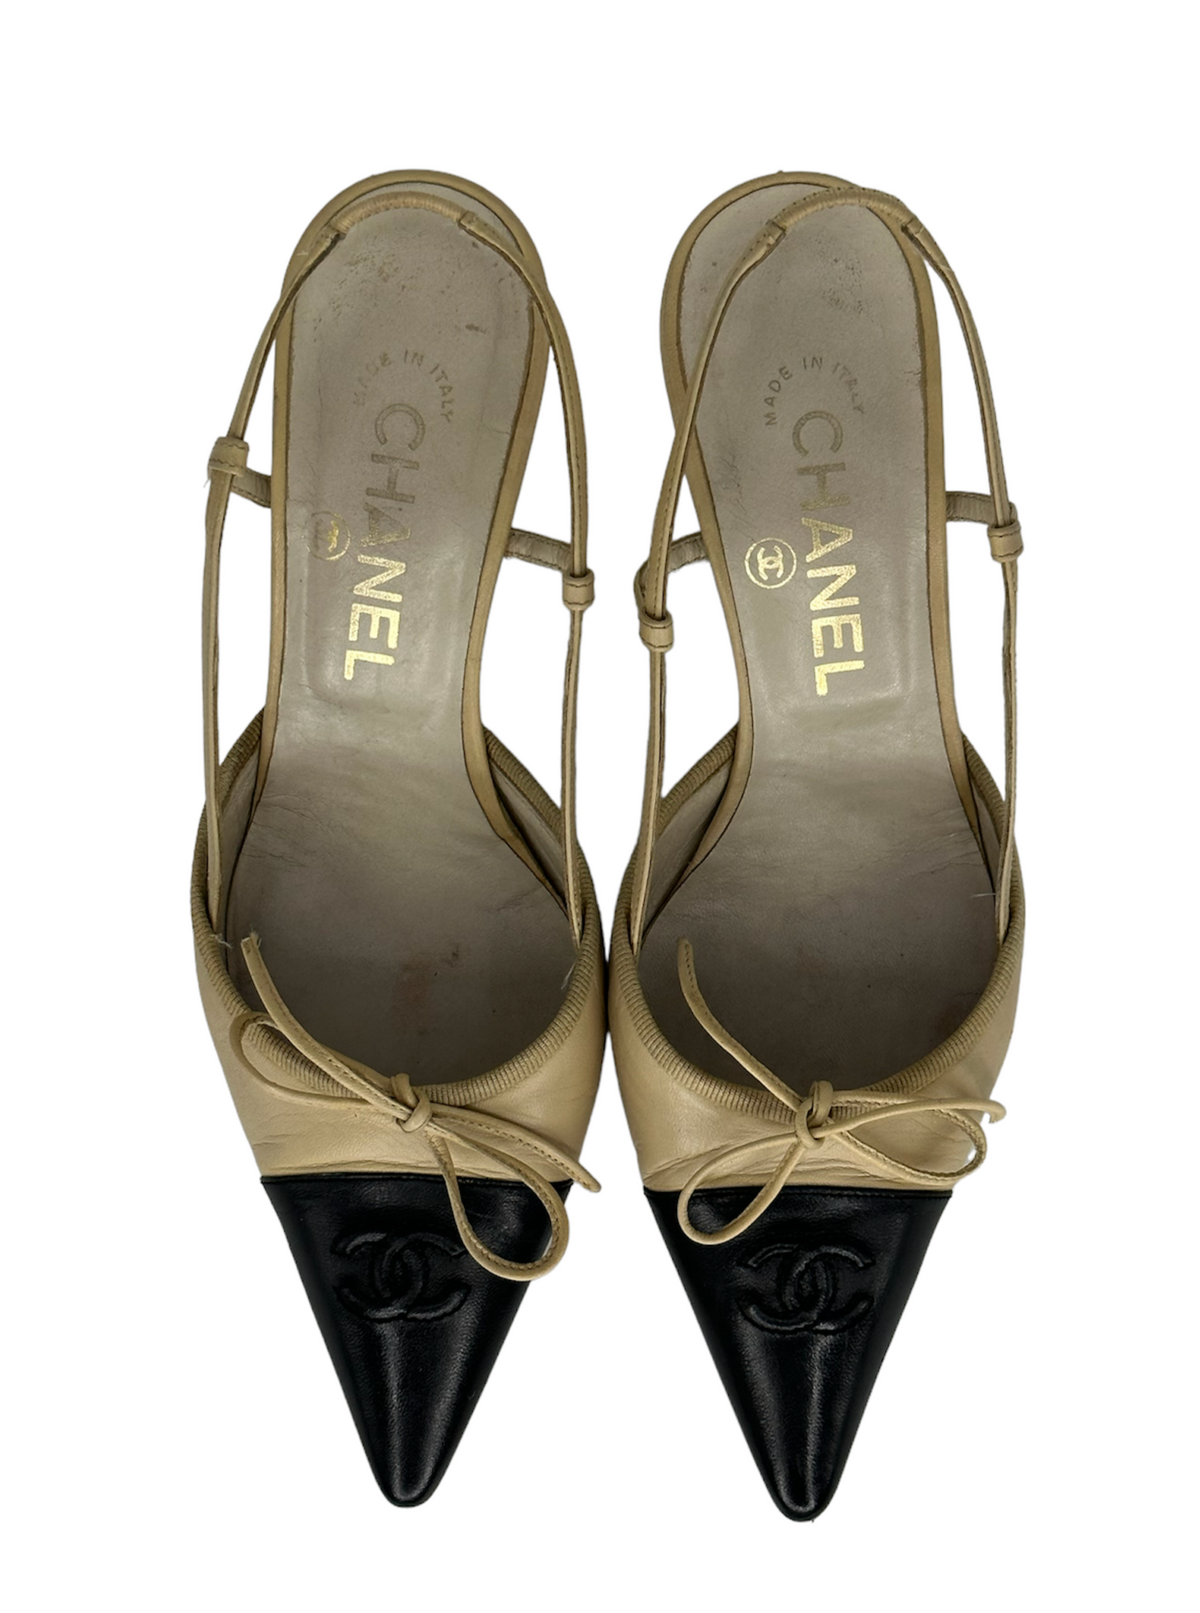 CHANEL, Shoes, Authentic Chanel Slingback Heels Size 38